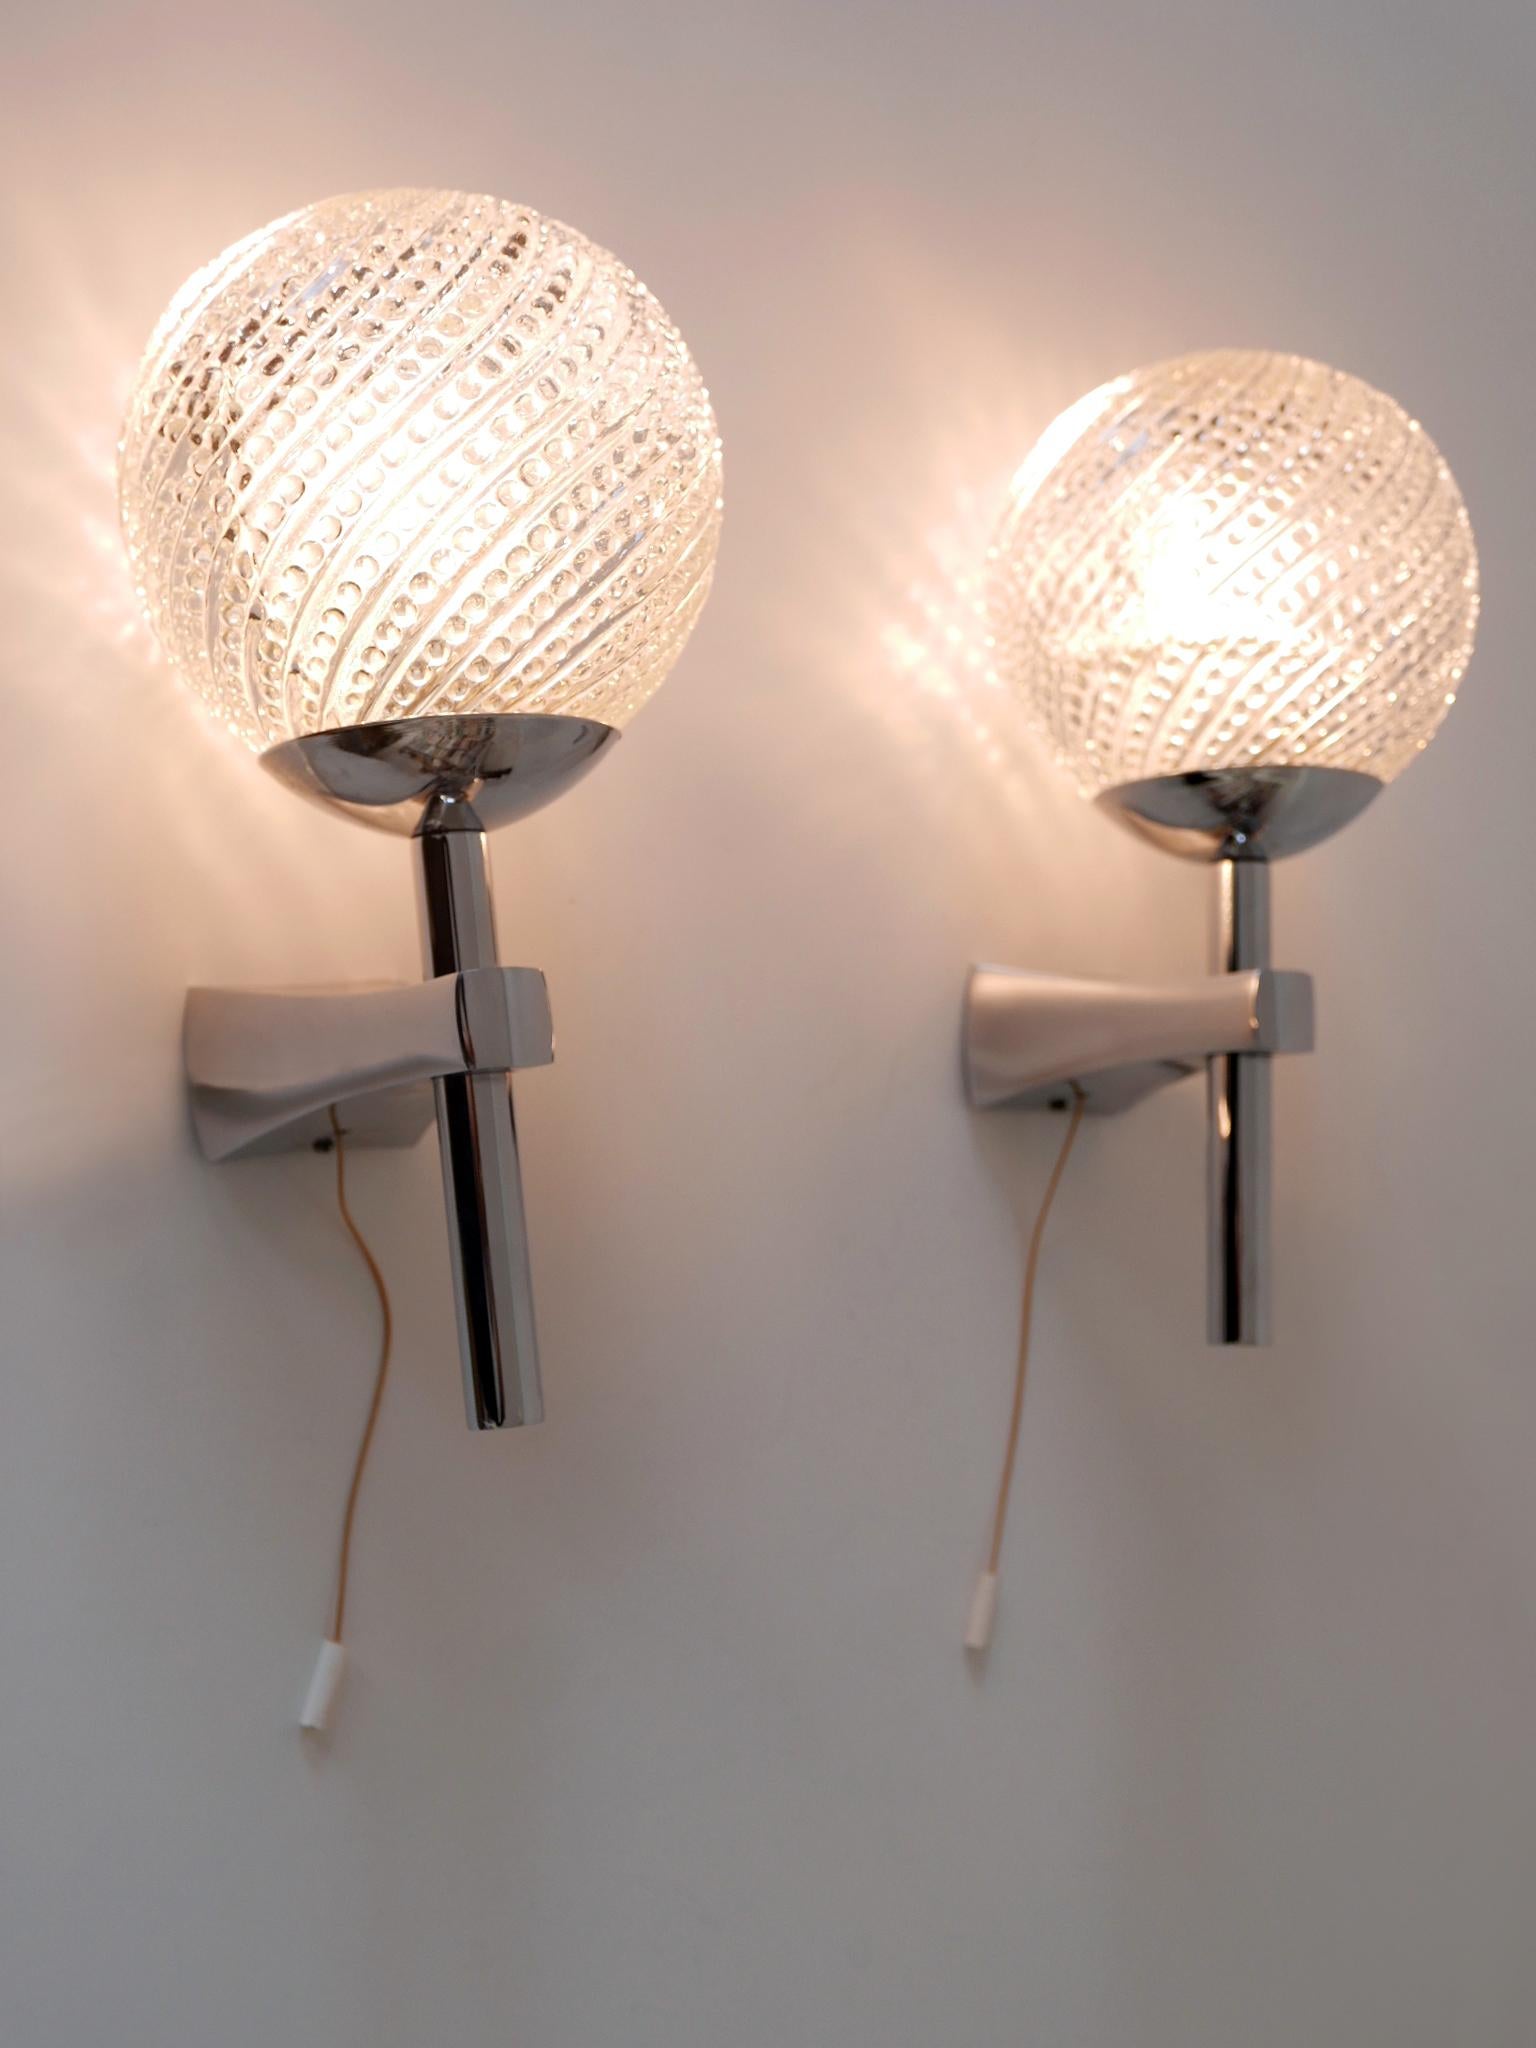 Set of two elegant Mid-Century Modern sconces or wall lights. Designed & manufactured in Germany, 1970s.

Executed in textured glass and chrome-plated brass, each sconce is executed with 1 x E14 / E12 Edison screw fit bulb socket, is wired and in